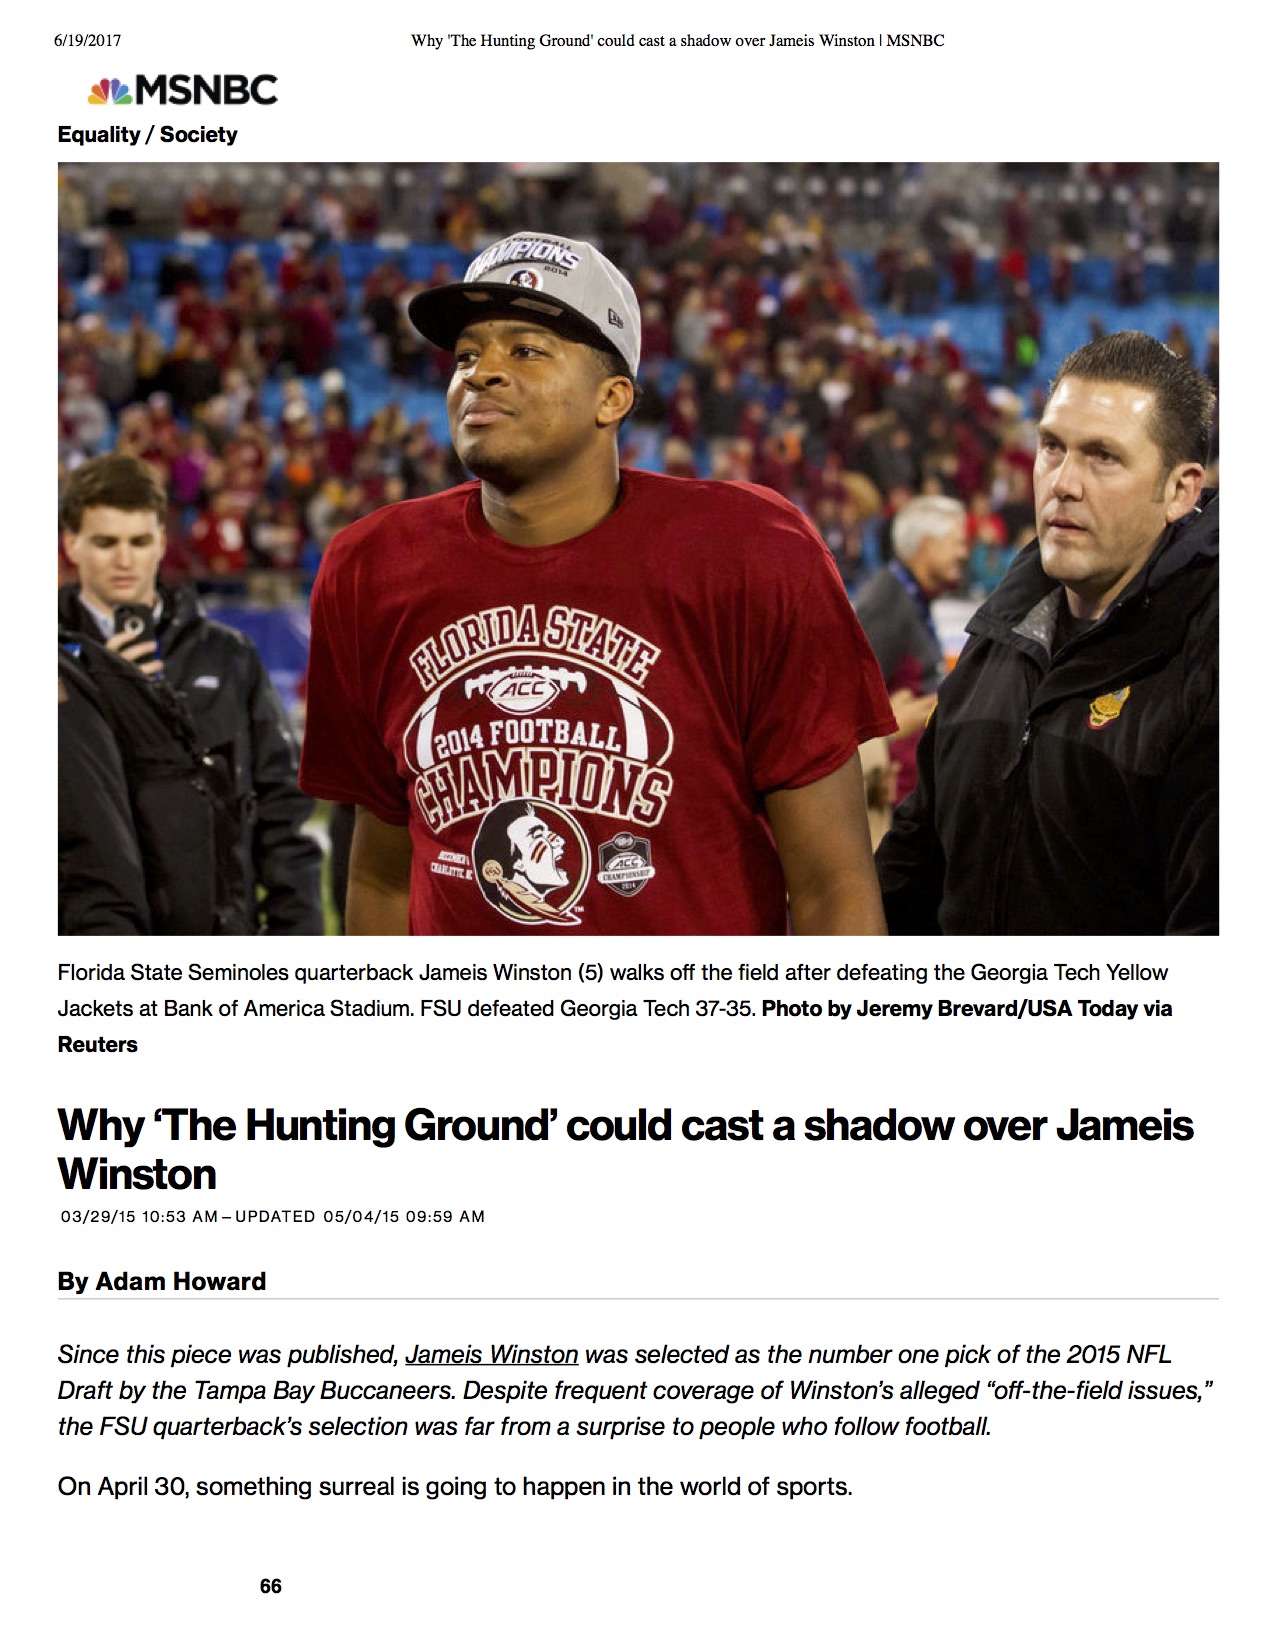 1Why 'The Hunting Ground' could cast a shadow over Jameis Winston _ MSNBC.jpg